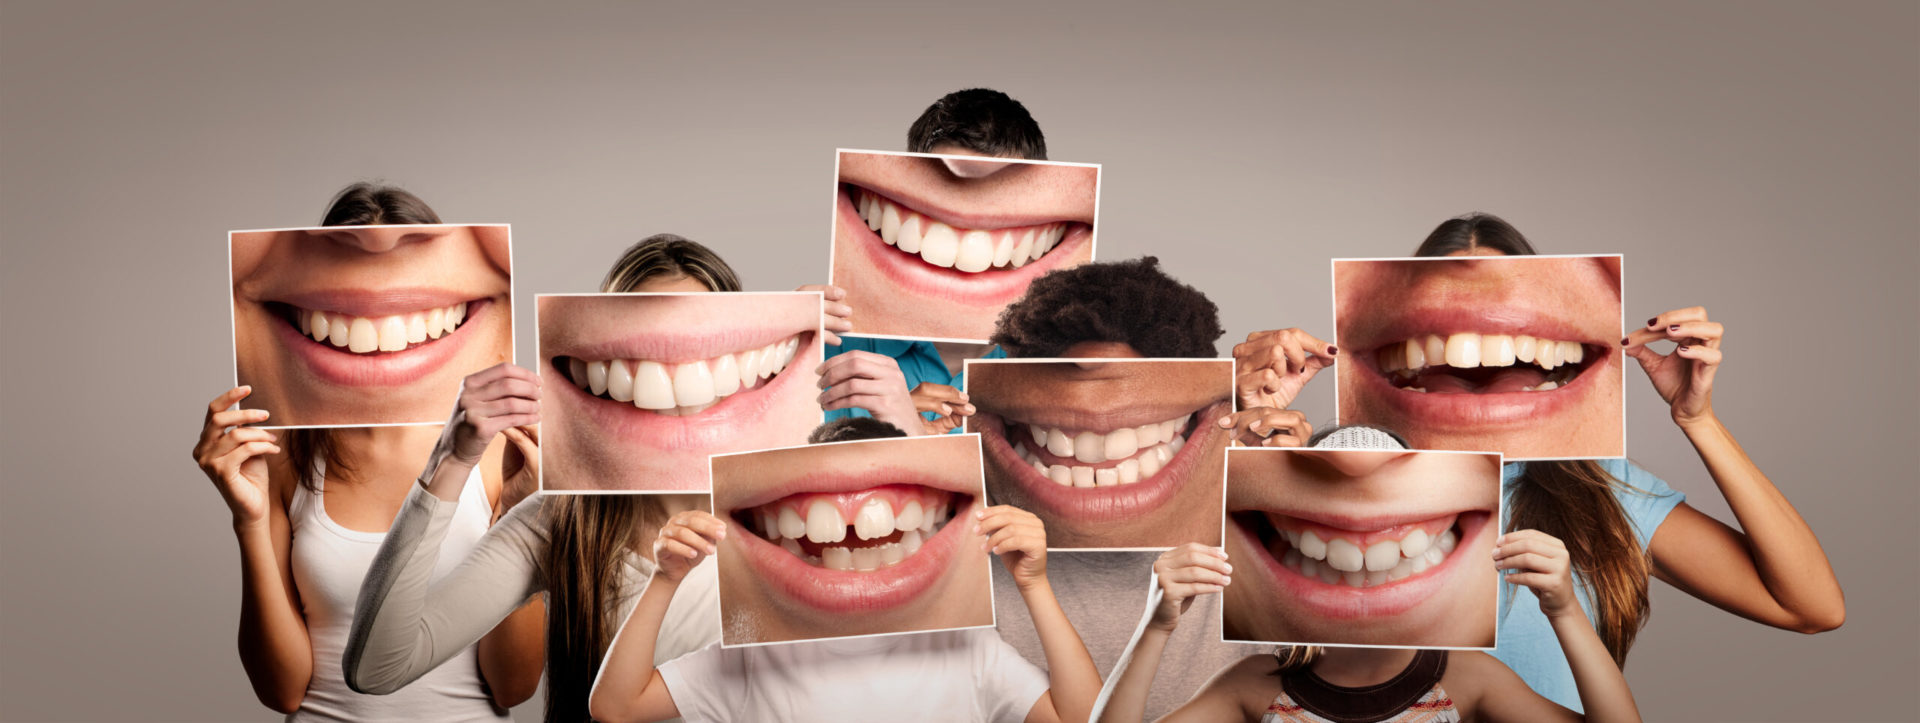 group of happy people holding a picture of a mouth smiling on a piece of paper